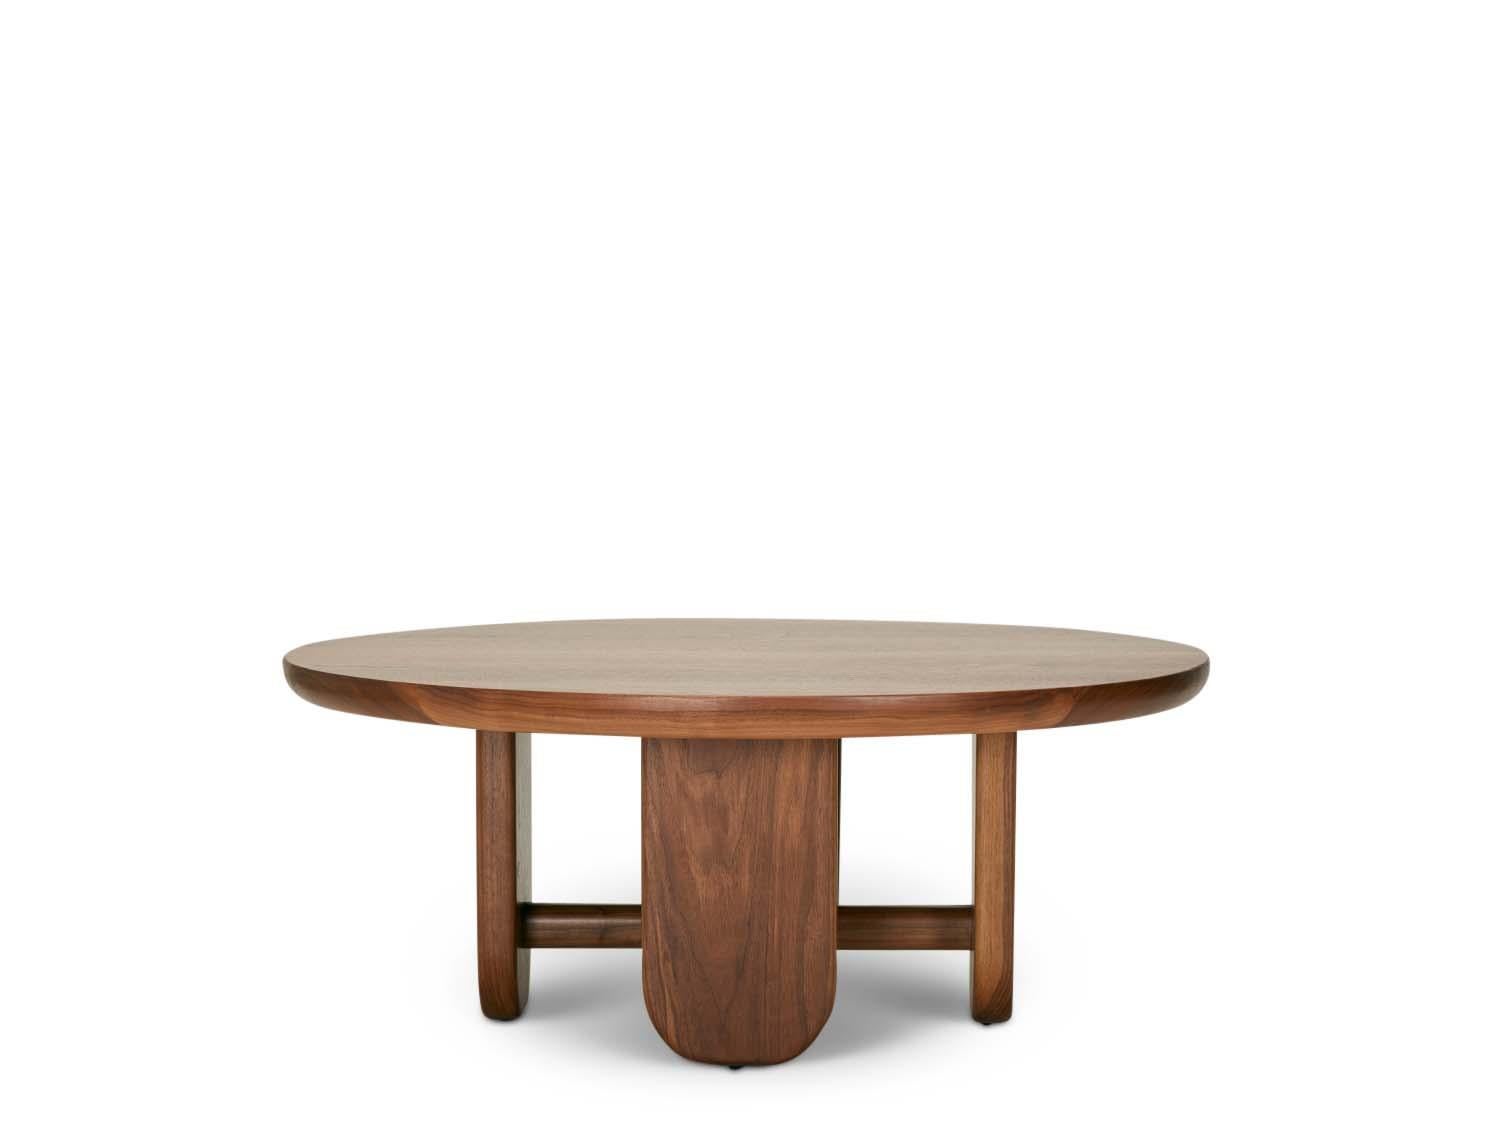 The Rainier Coffee Table is part of the collaborative collection with interior designer Brian Paquette. The Rainier Coffee Table features a solid wood top and four pedestal legs connected with a solid wood stretcher.

The Lawson-Fenning Collection